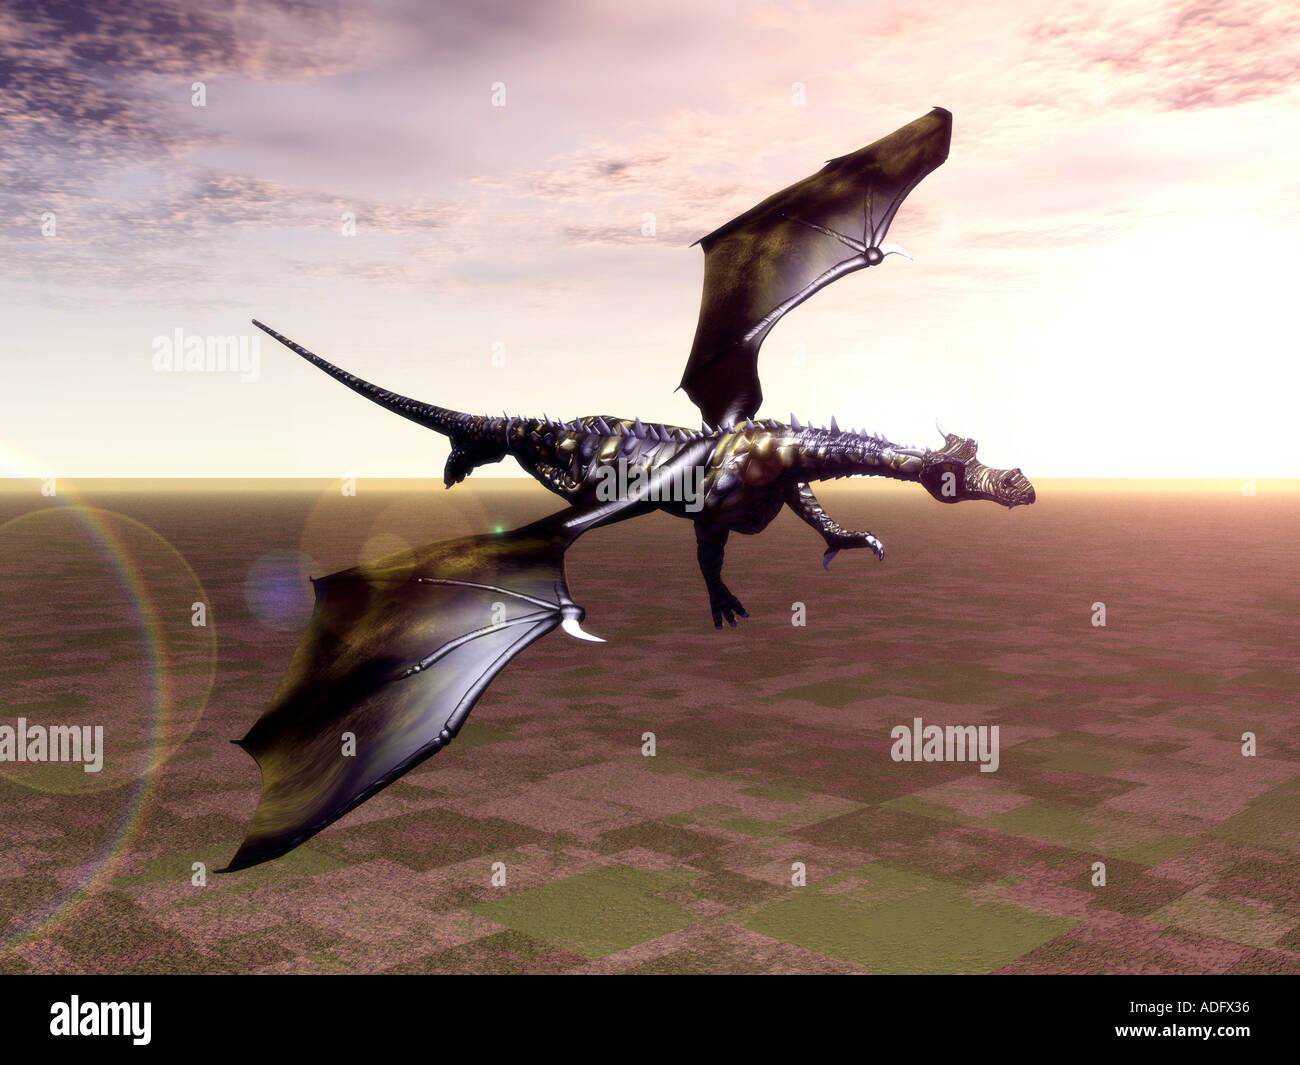 dragon mythical creature in flight computer illustration Stock Photo